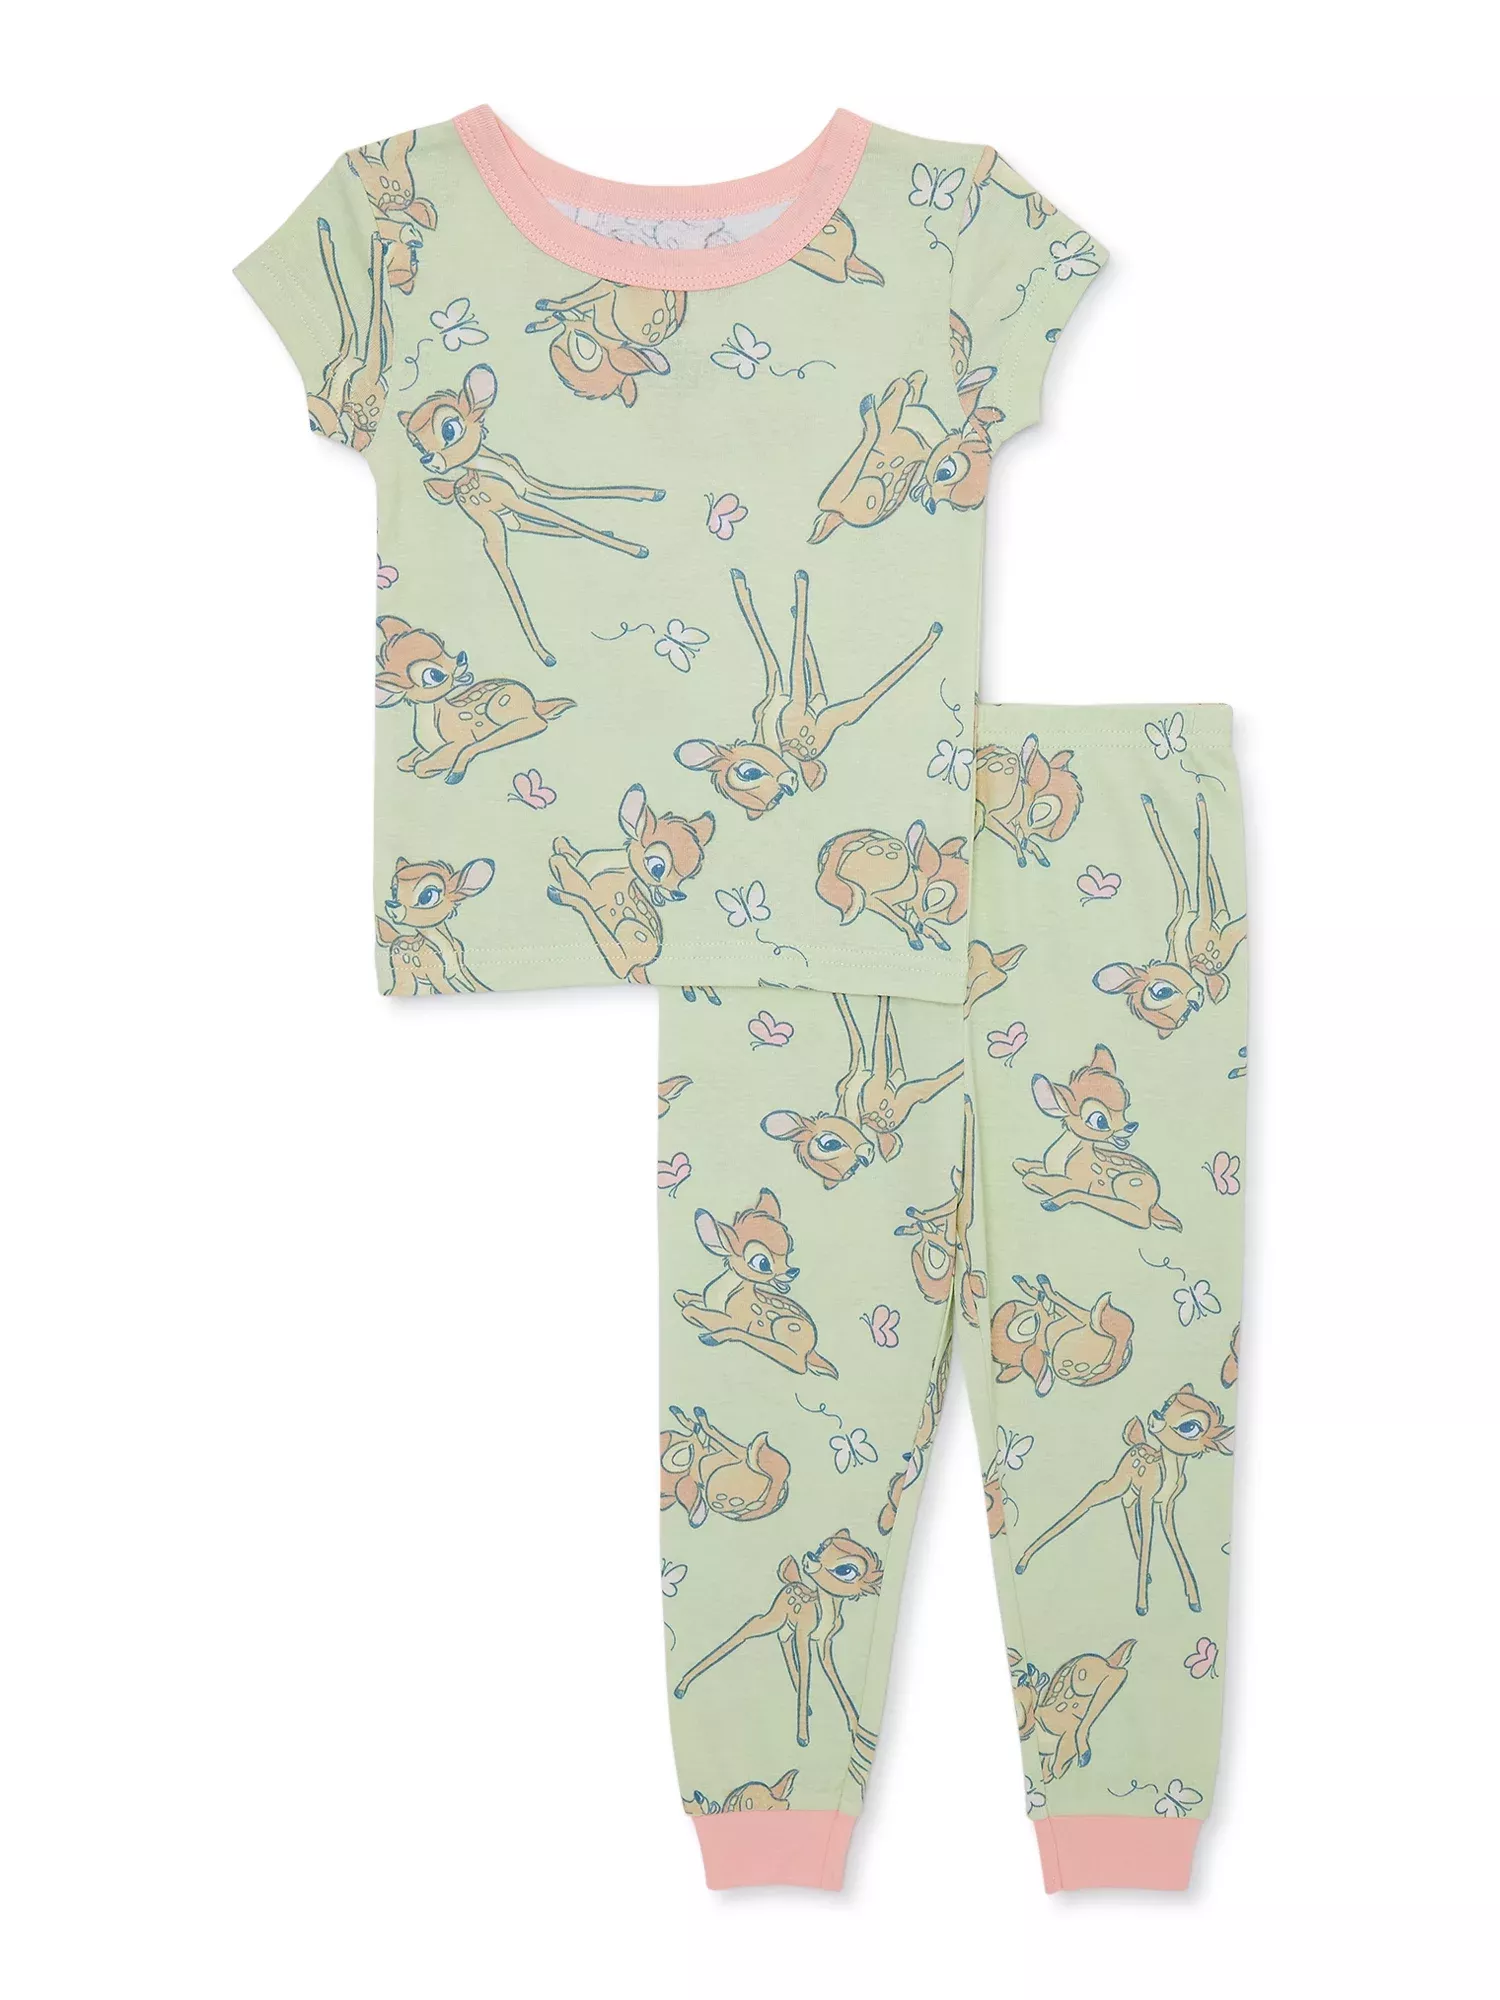 Toddler Character Pajamas, 2-Piece, Sizes 12M-5T